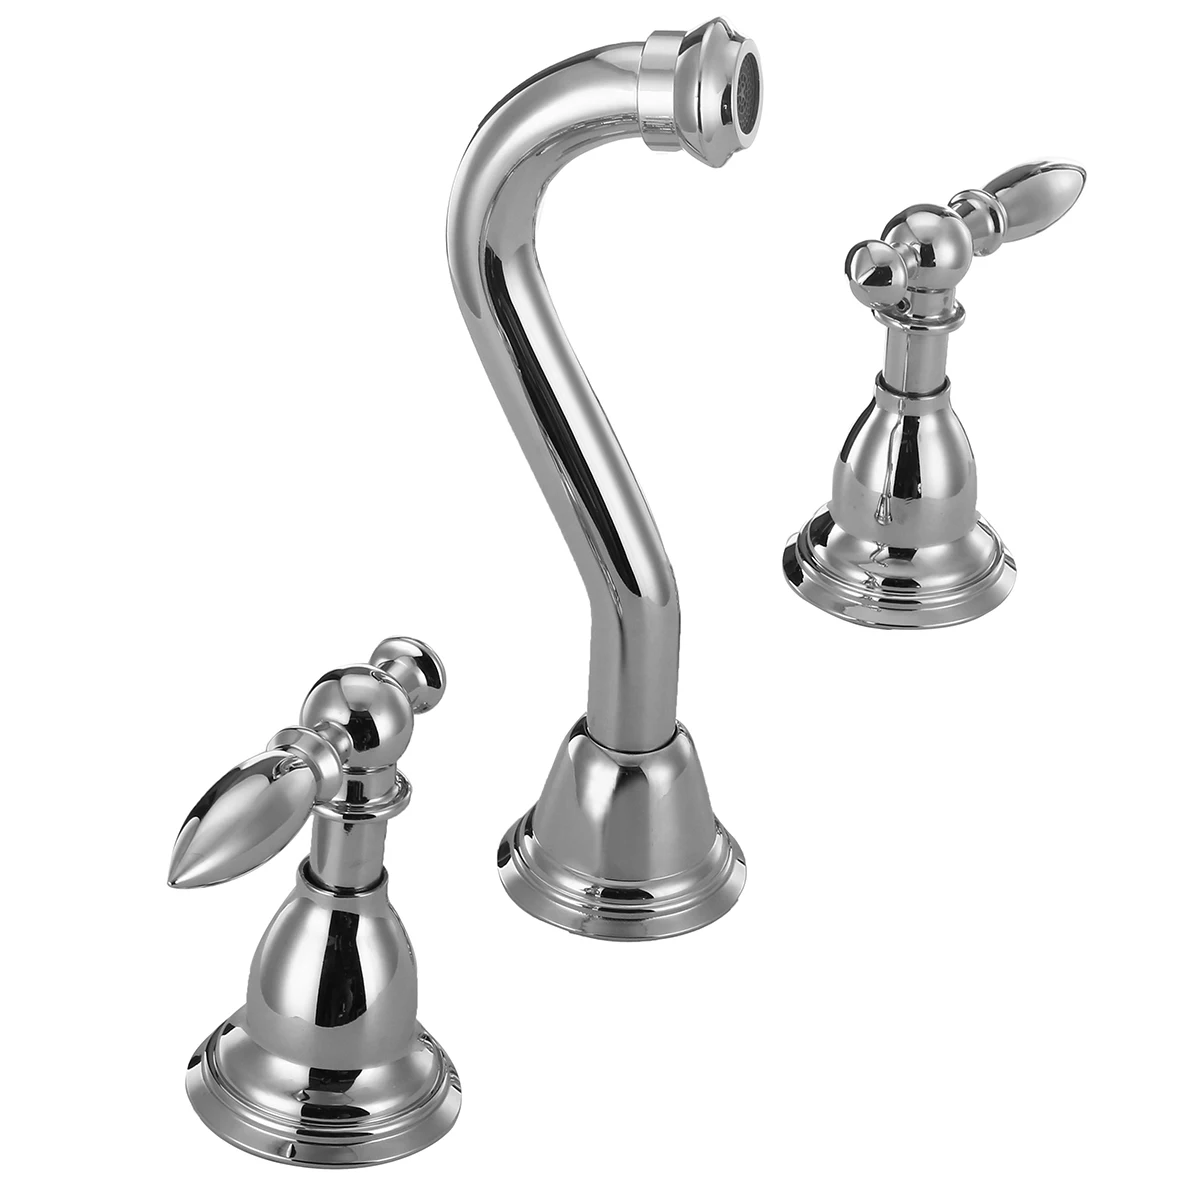 

NEW Stainless Steel Shower Bathroom Spout Faucet Wall Sink Basin Mixer Tap Set With Double Handles Wall-Mount Bathtub Faucet